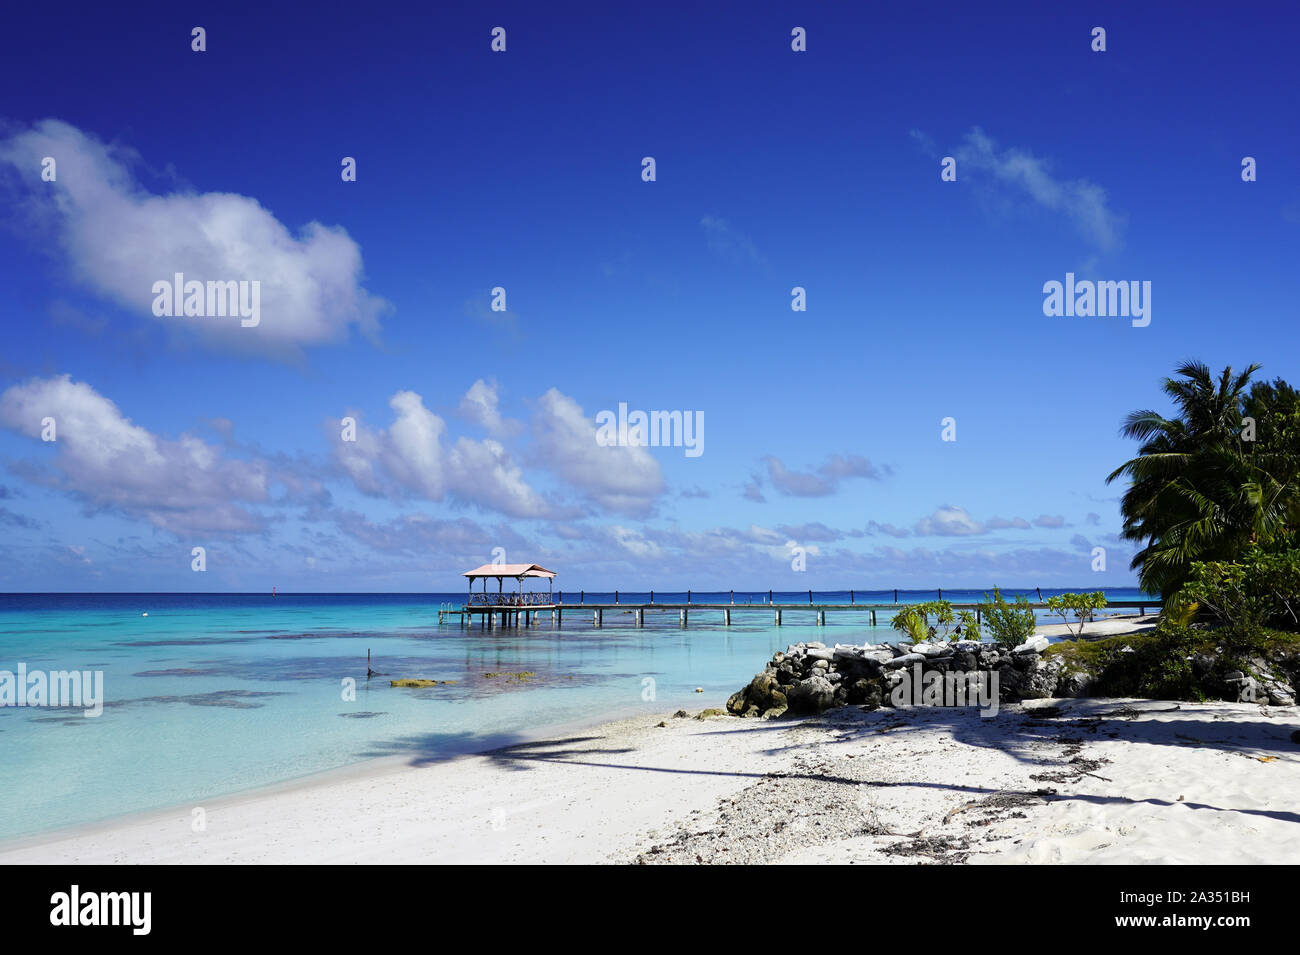 View of a dock from a sandy beach with palm trees leading into a blue lagoon on a tropical island Stock Photo